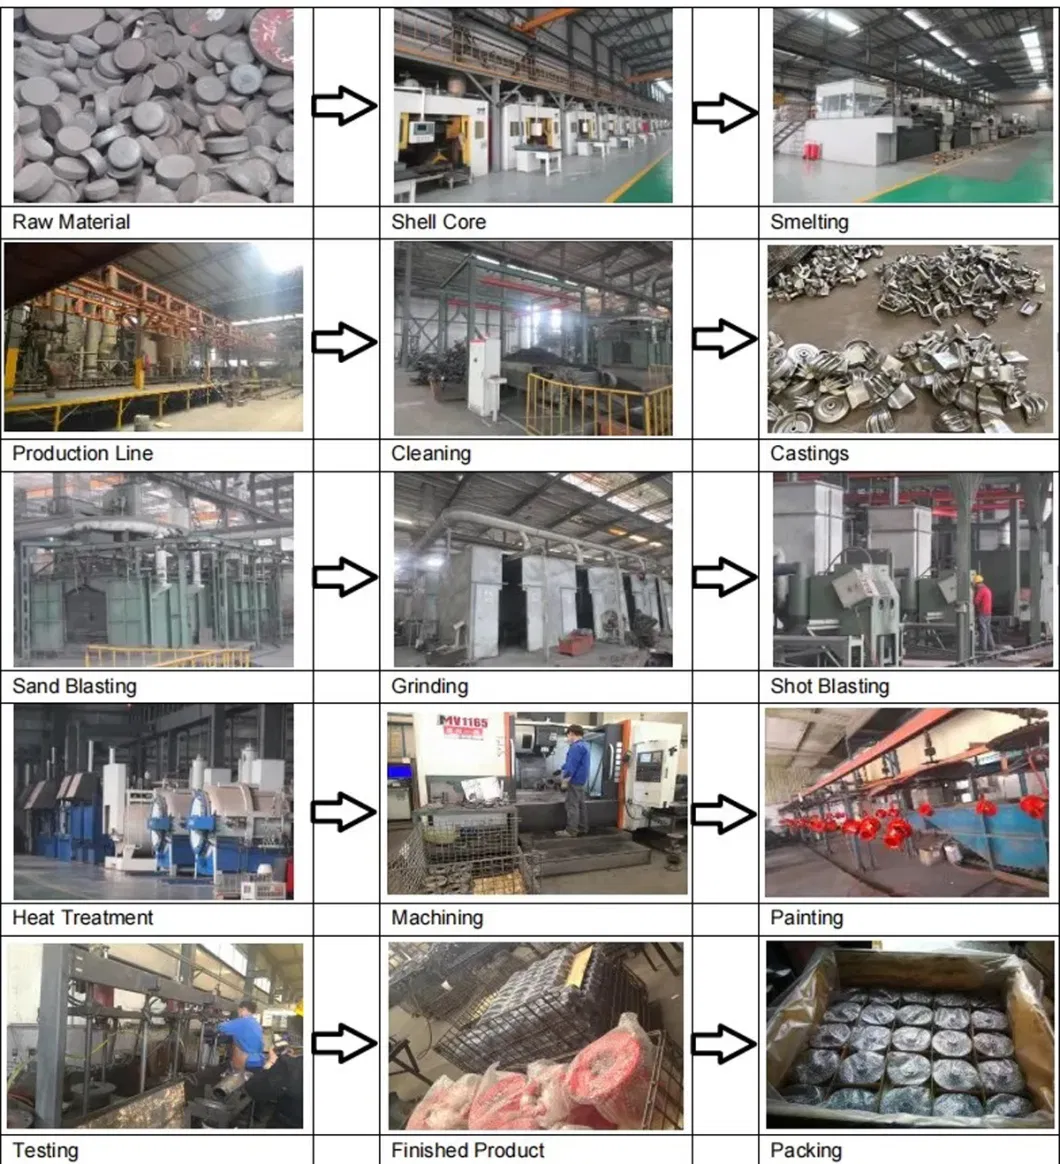 Cast Steel Gray Iron Ductile Iron Shell Mold Sand Casting